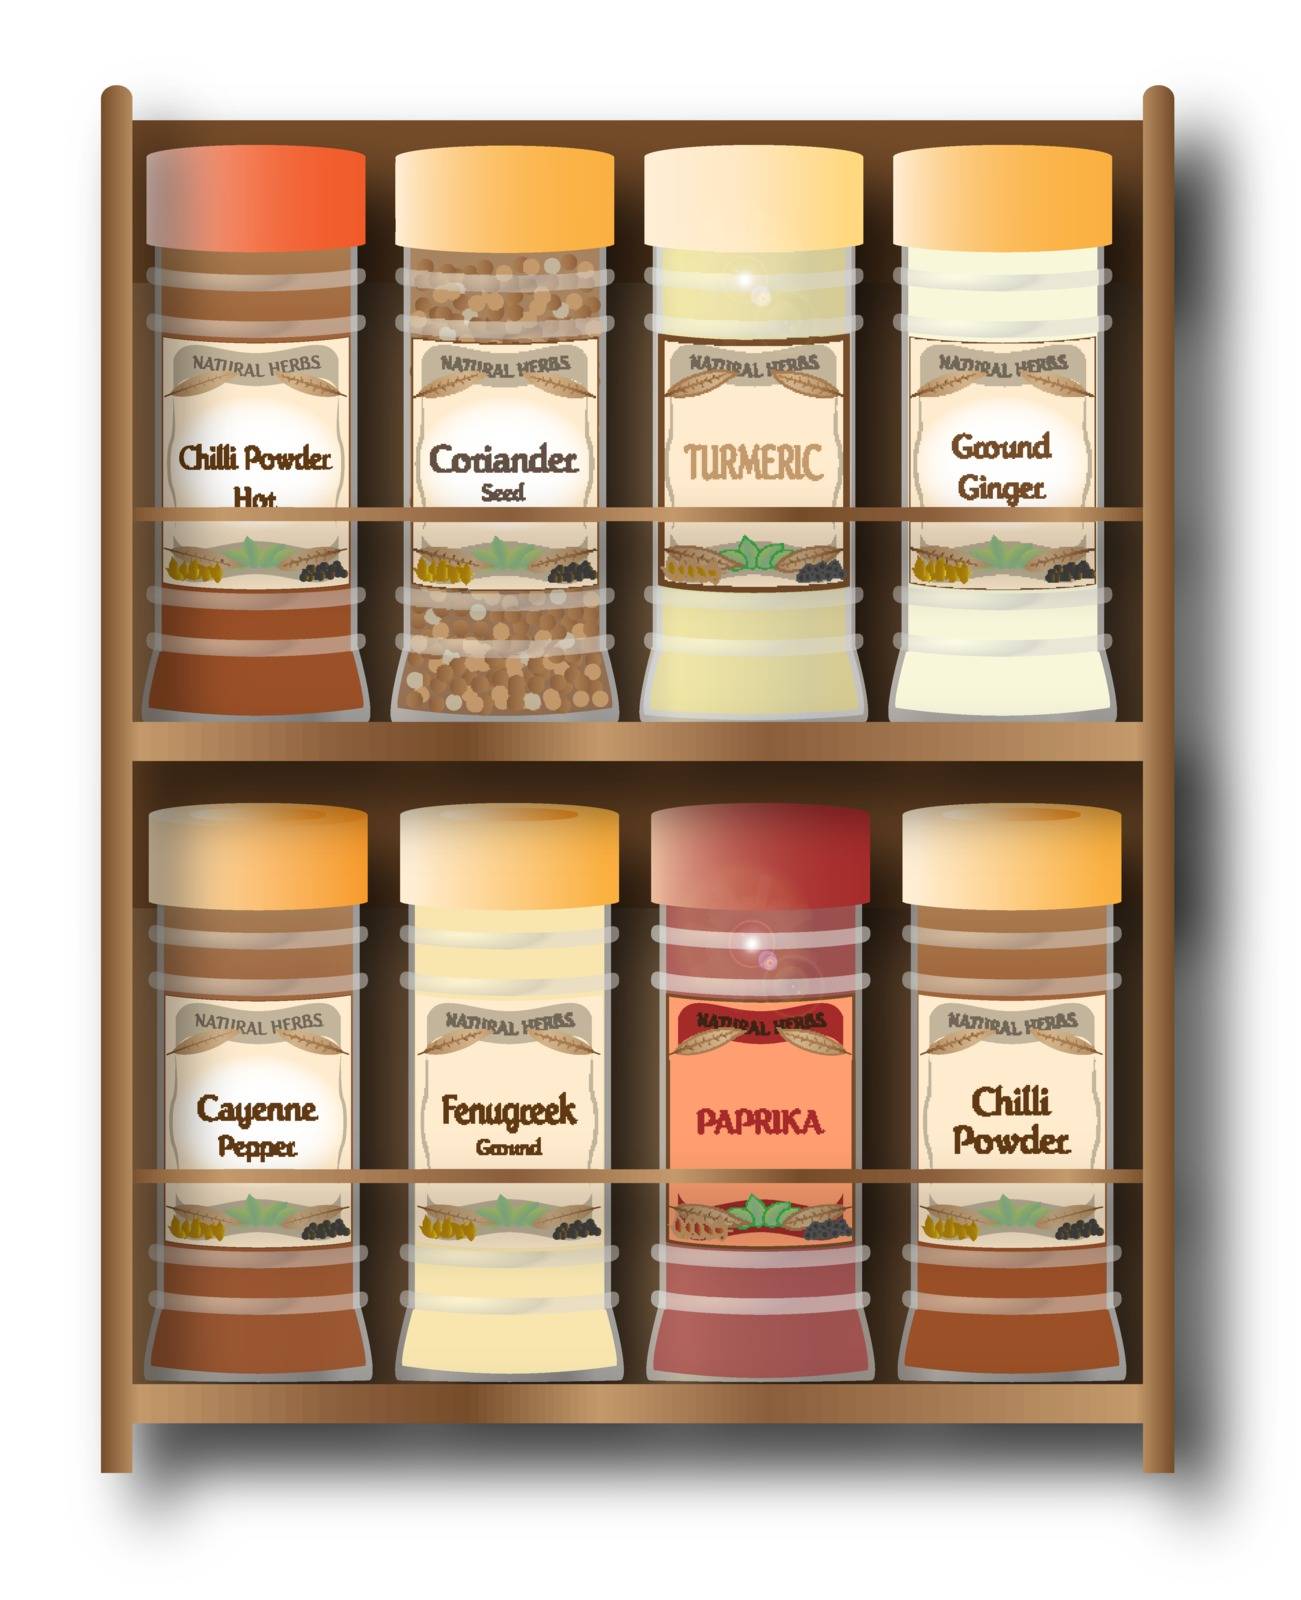 A small spice rack with hot spices isolated on a white background